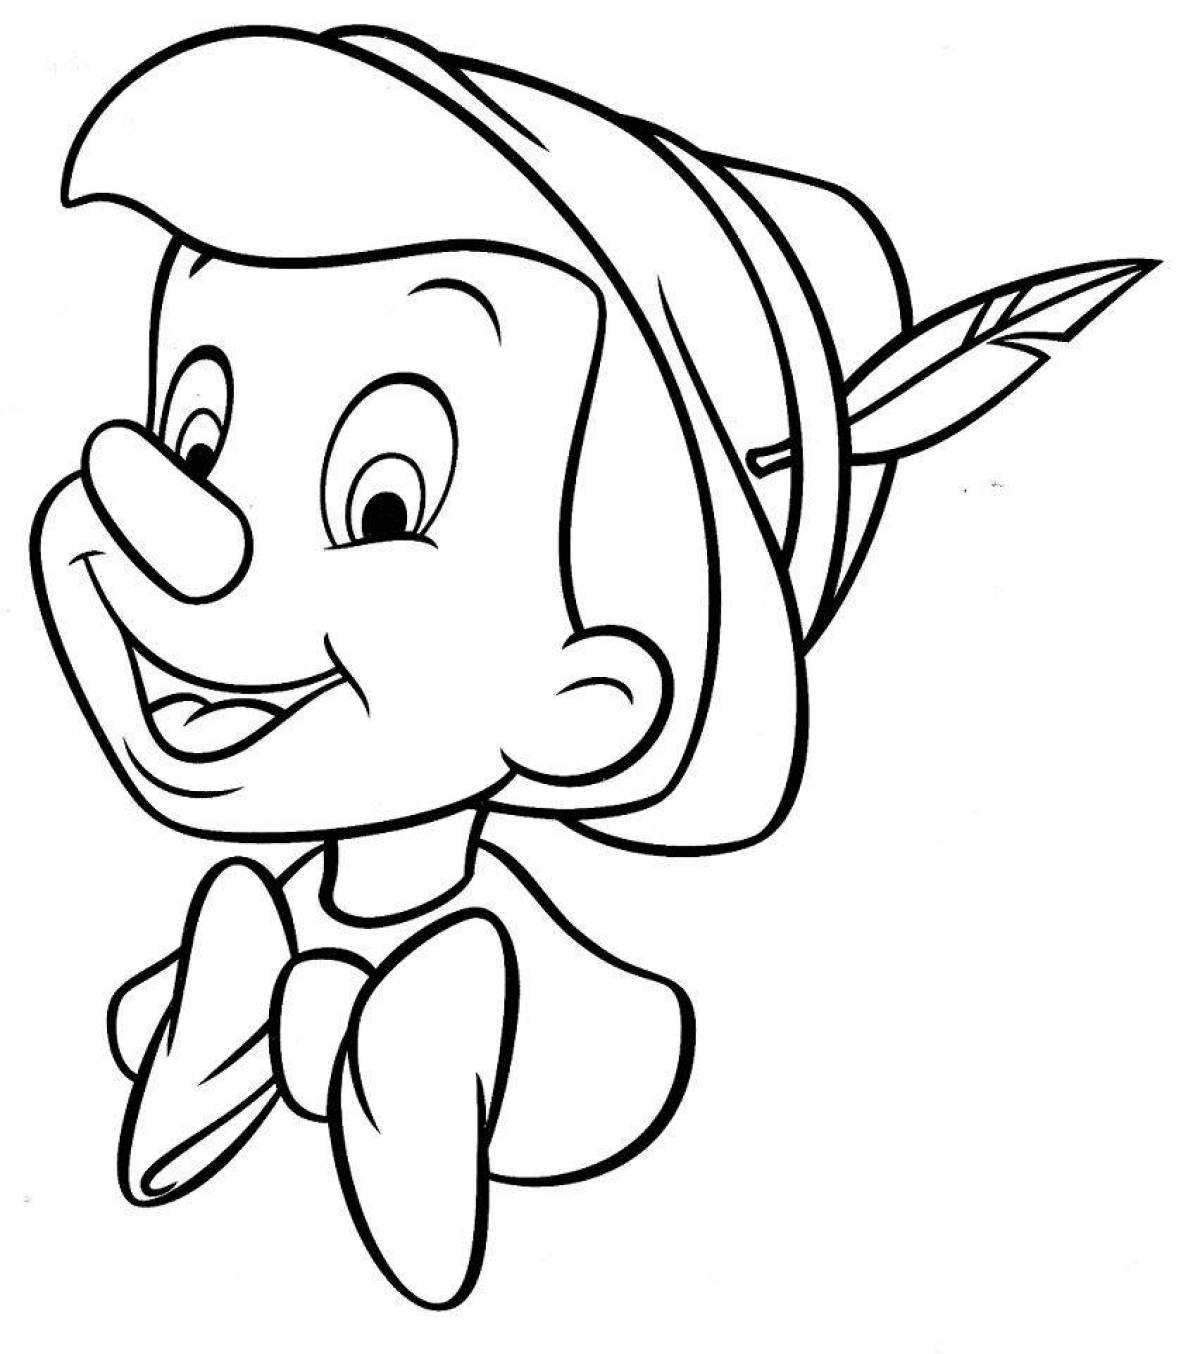 Coloring pages with fun cartoon characters for kids